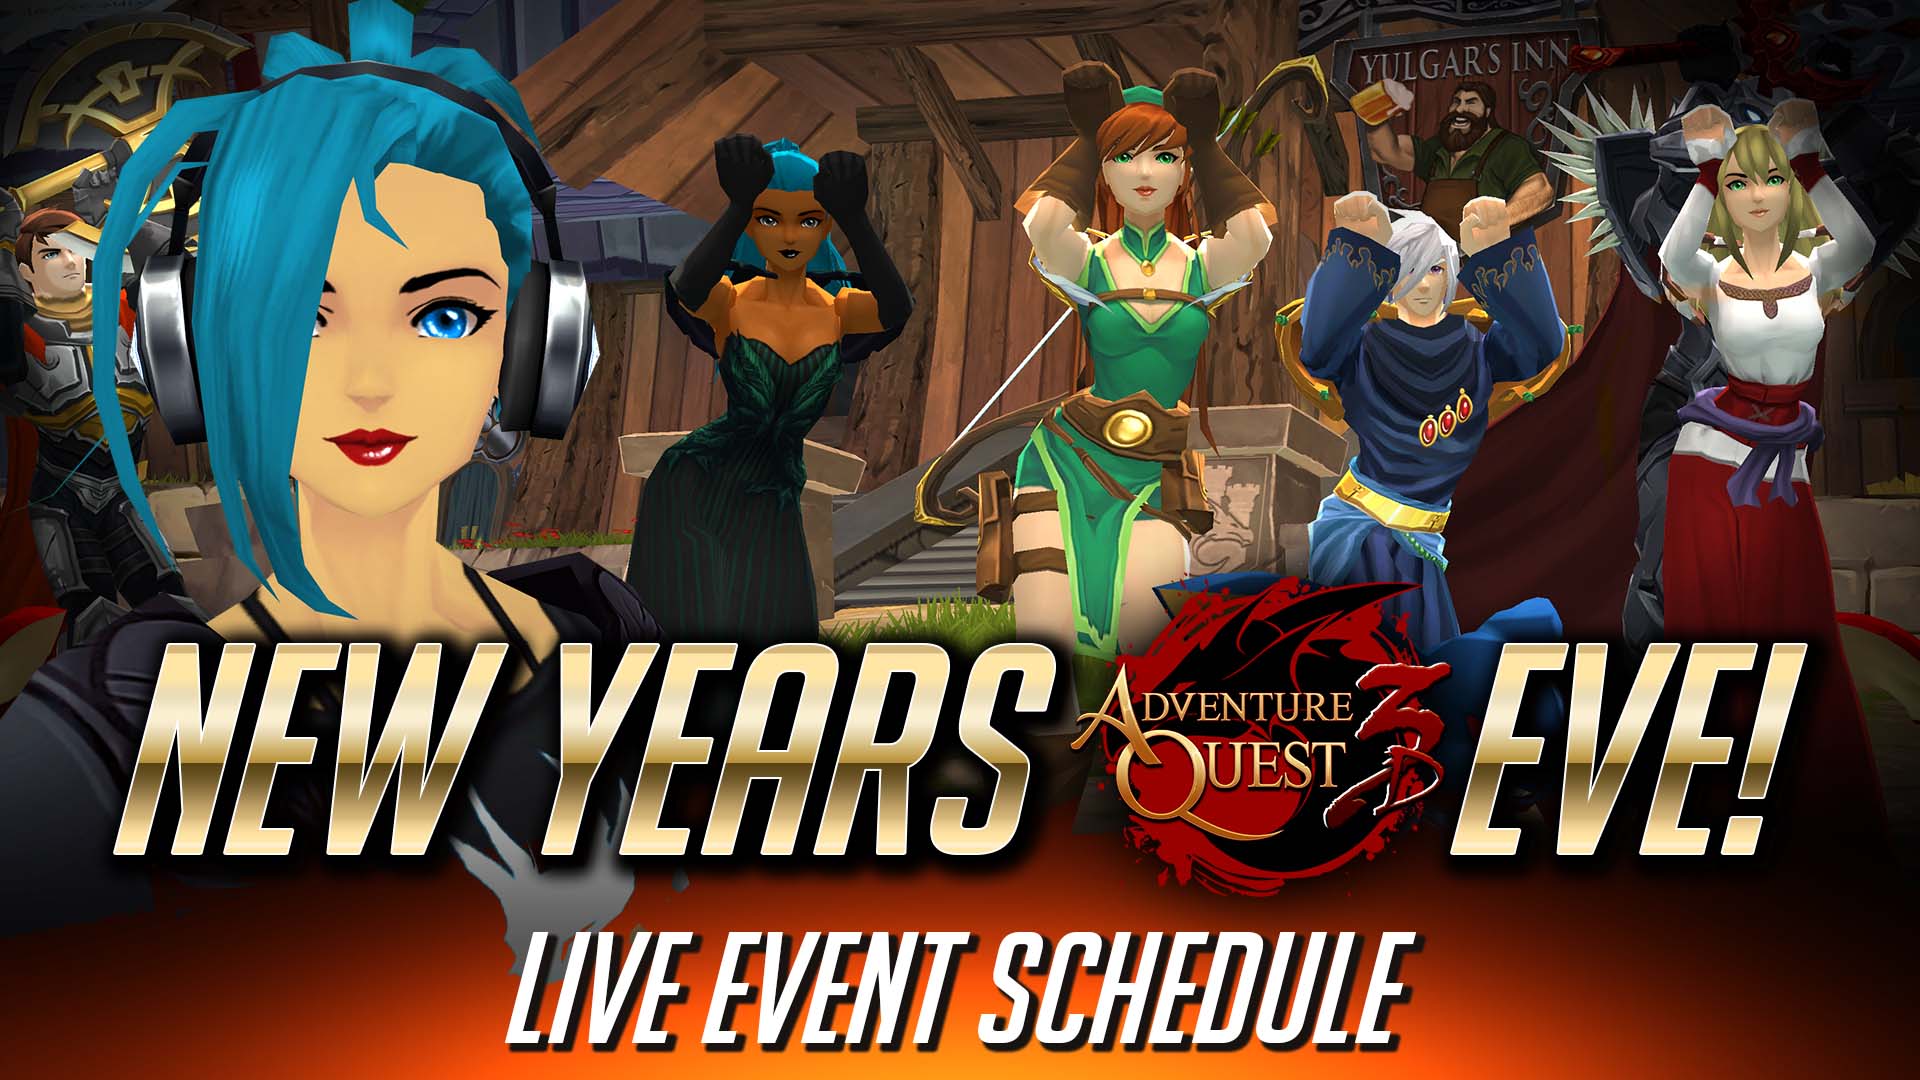 New Years Eve Live Event Schedule